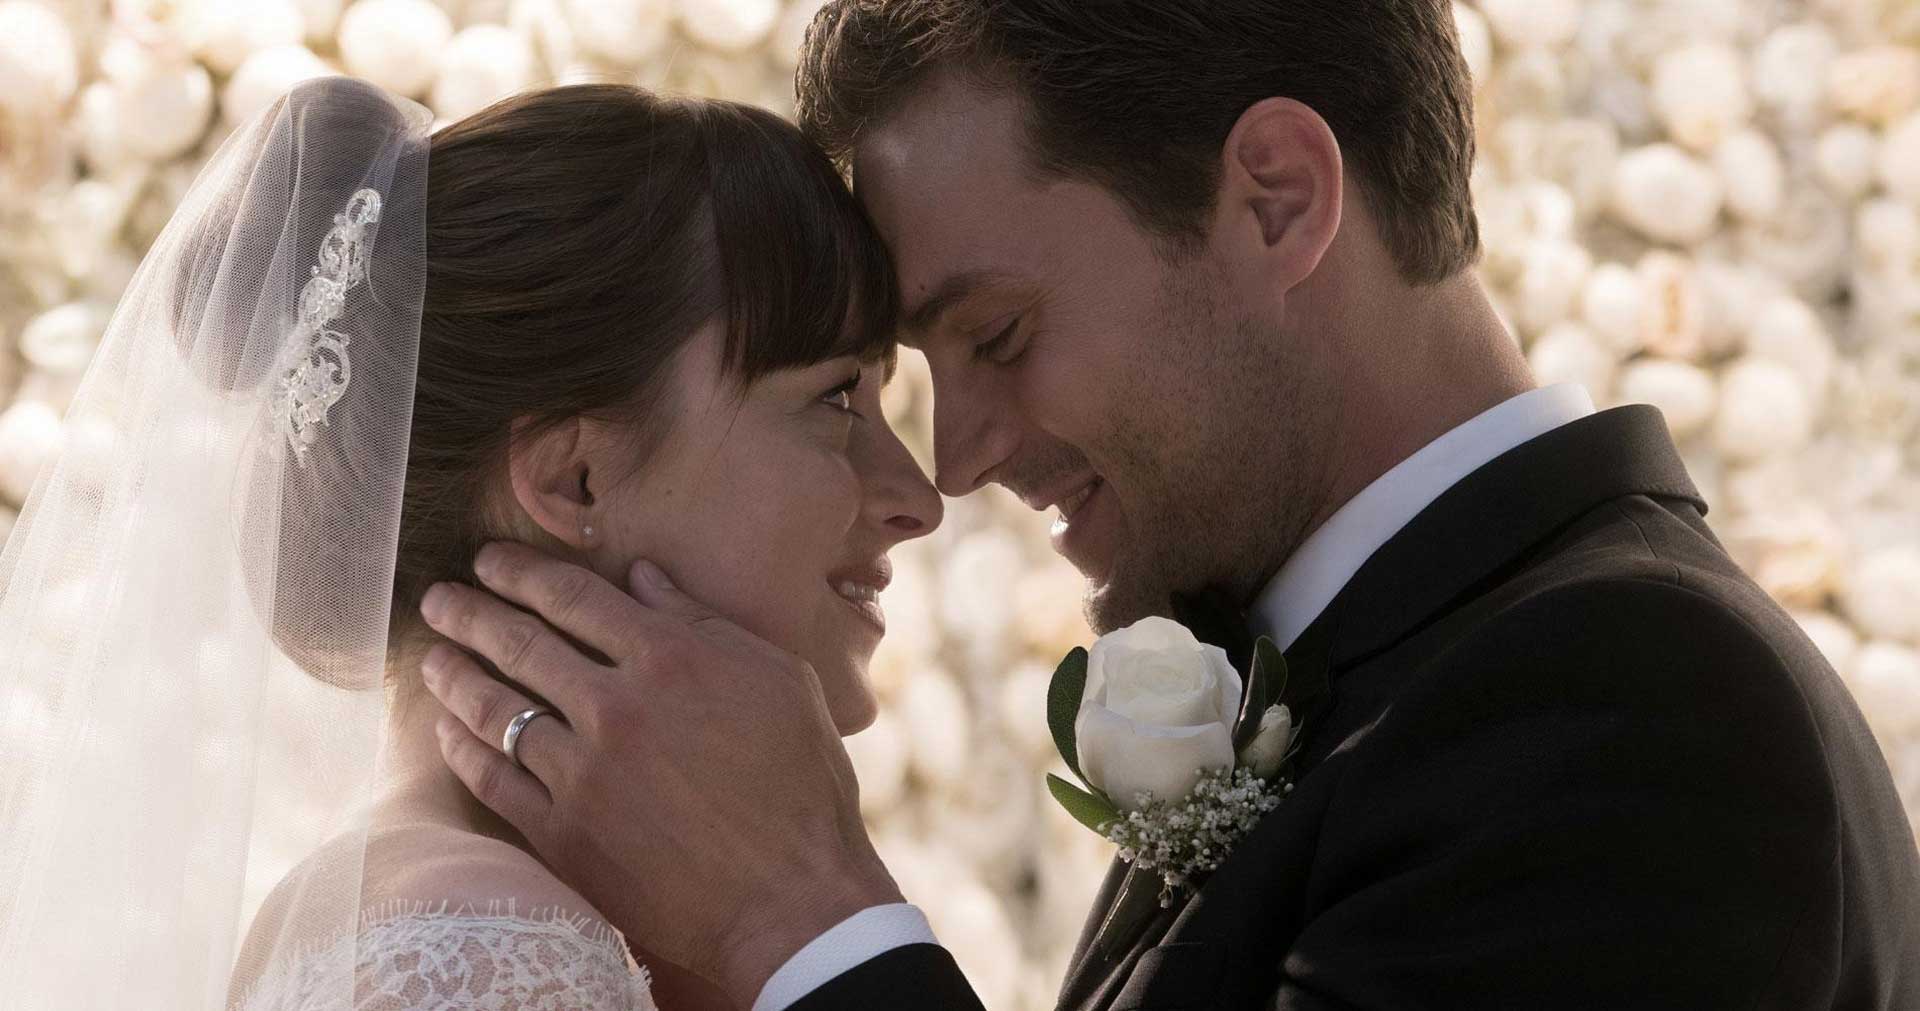 fifty shades of grey full movie uncut download